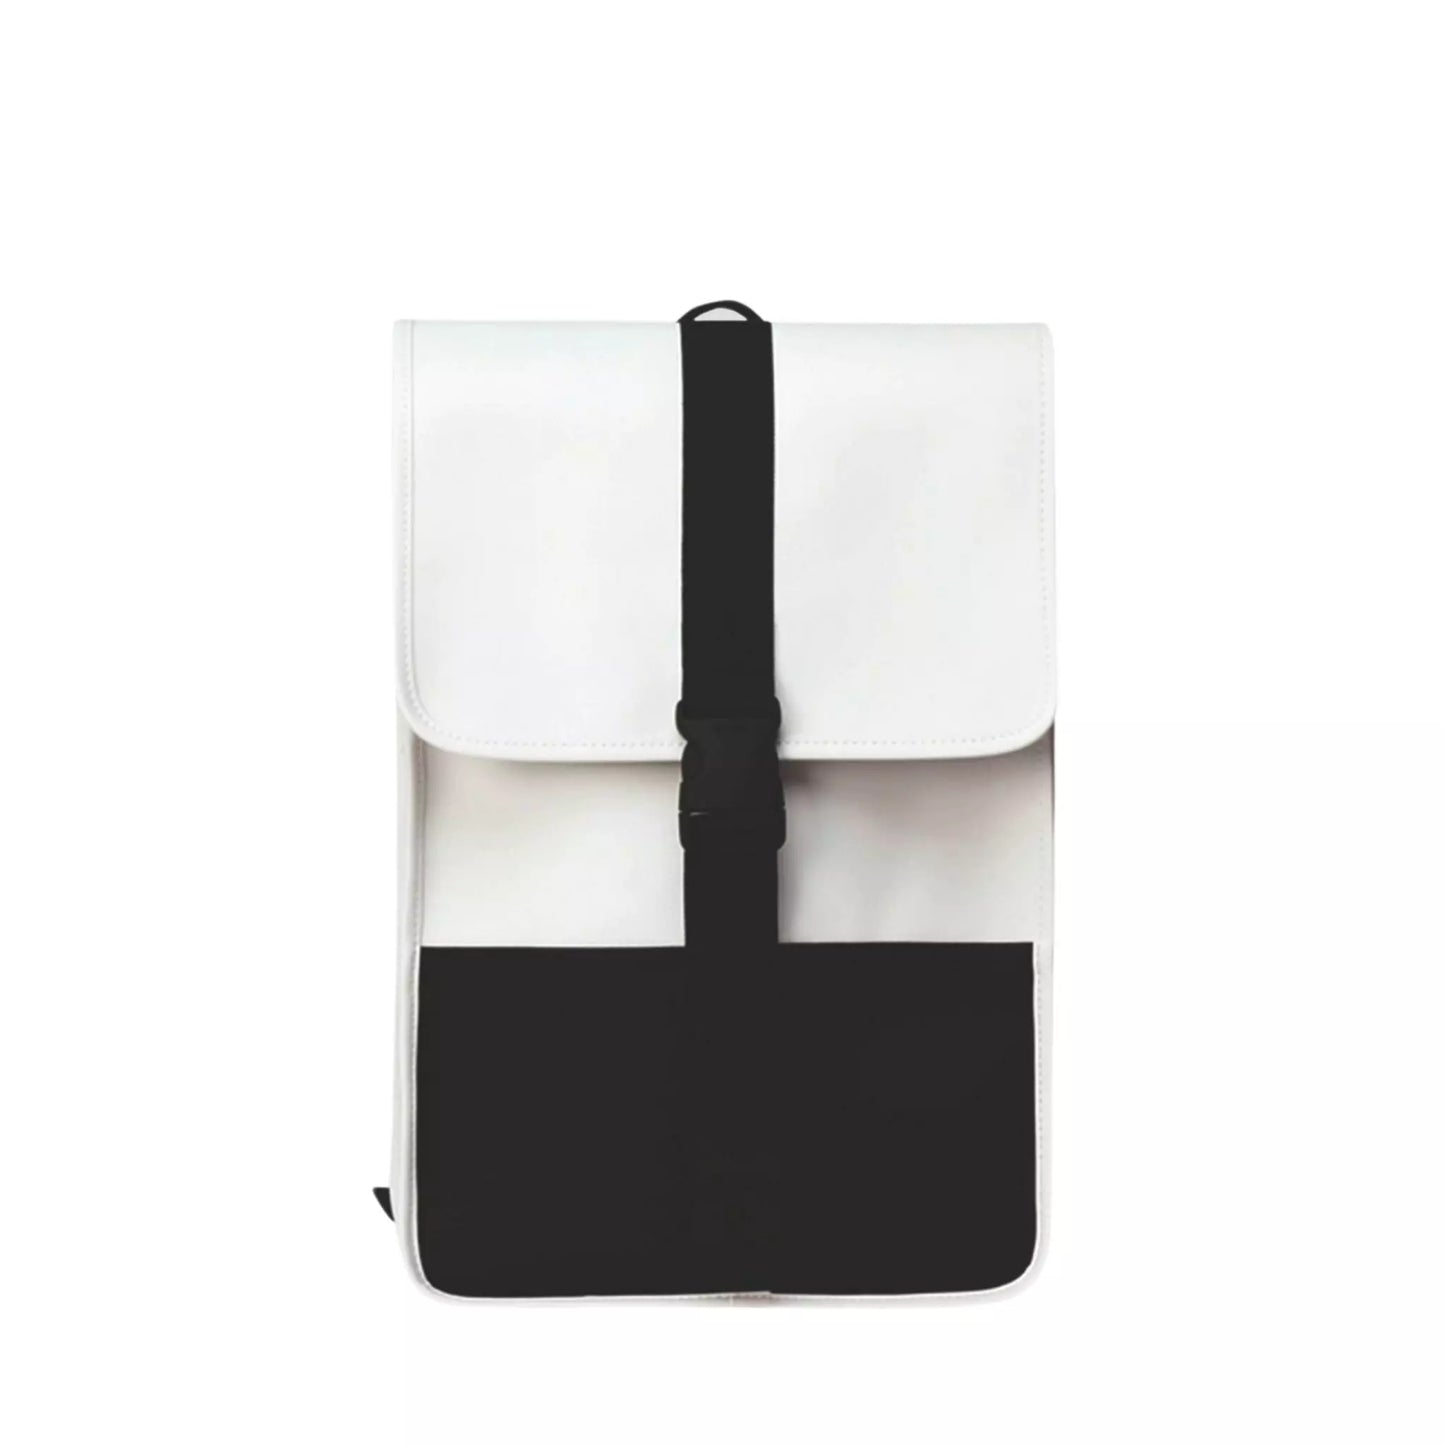 Rains waterproof buckle backpack mini off white black for men and women